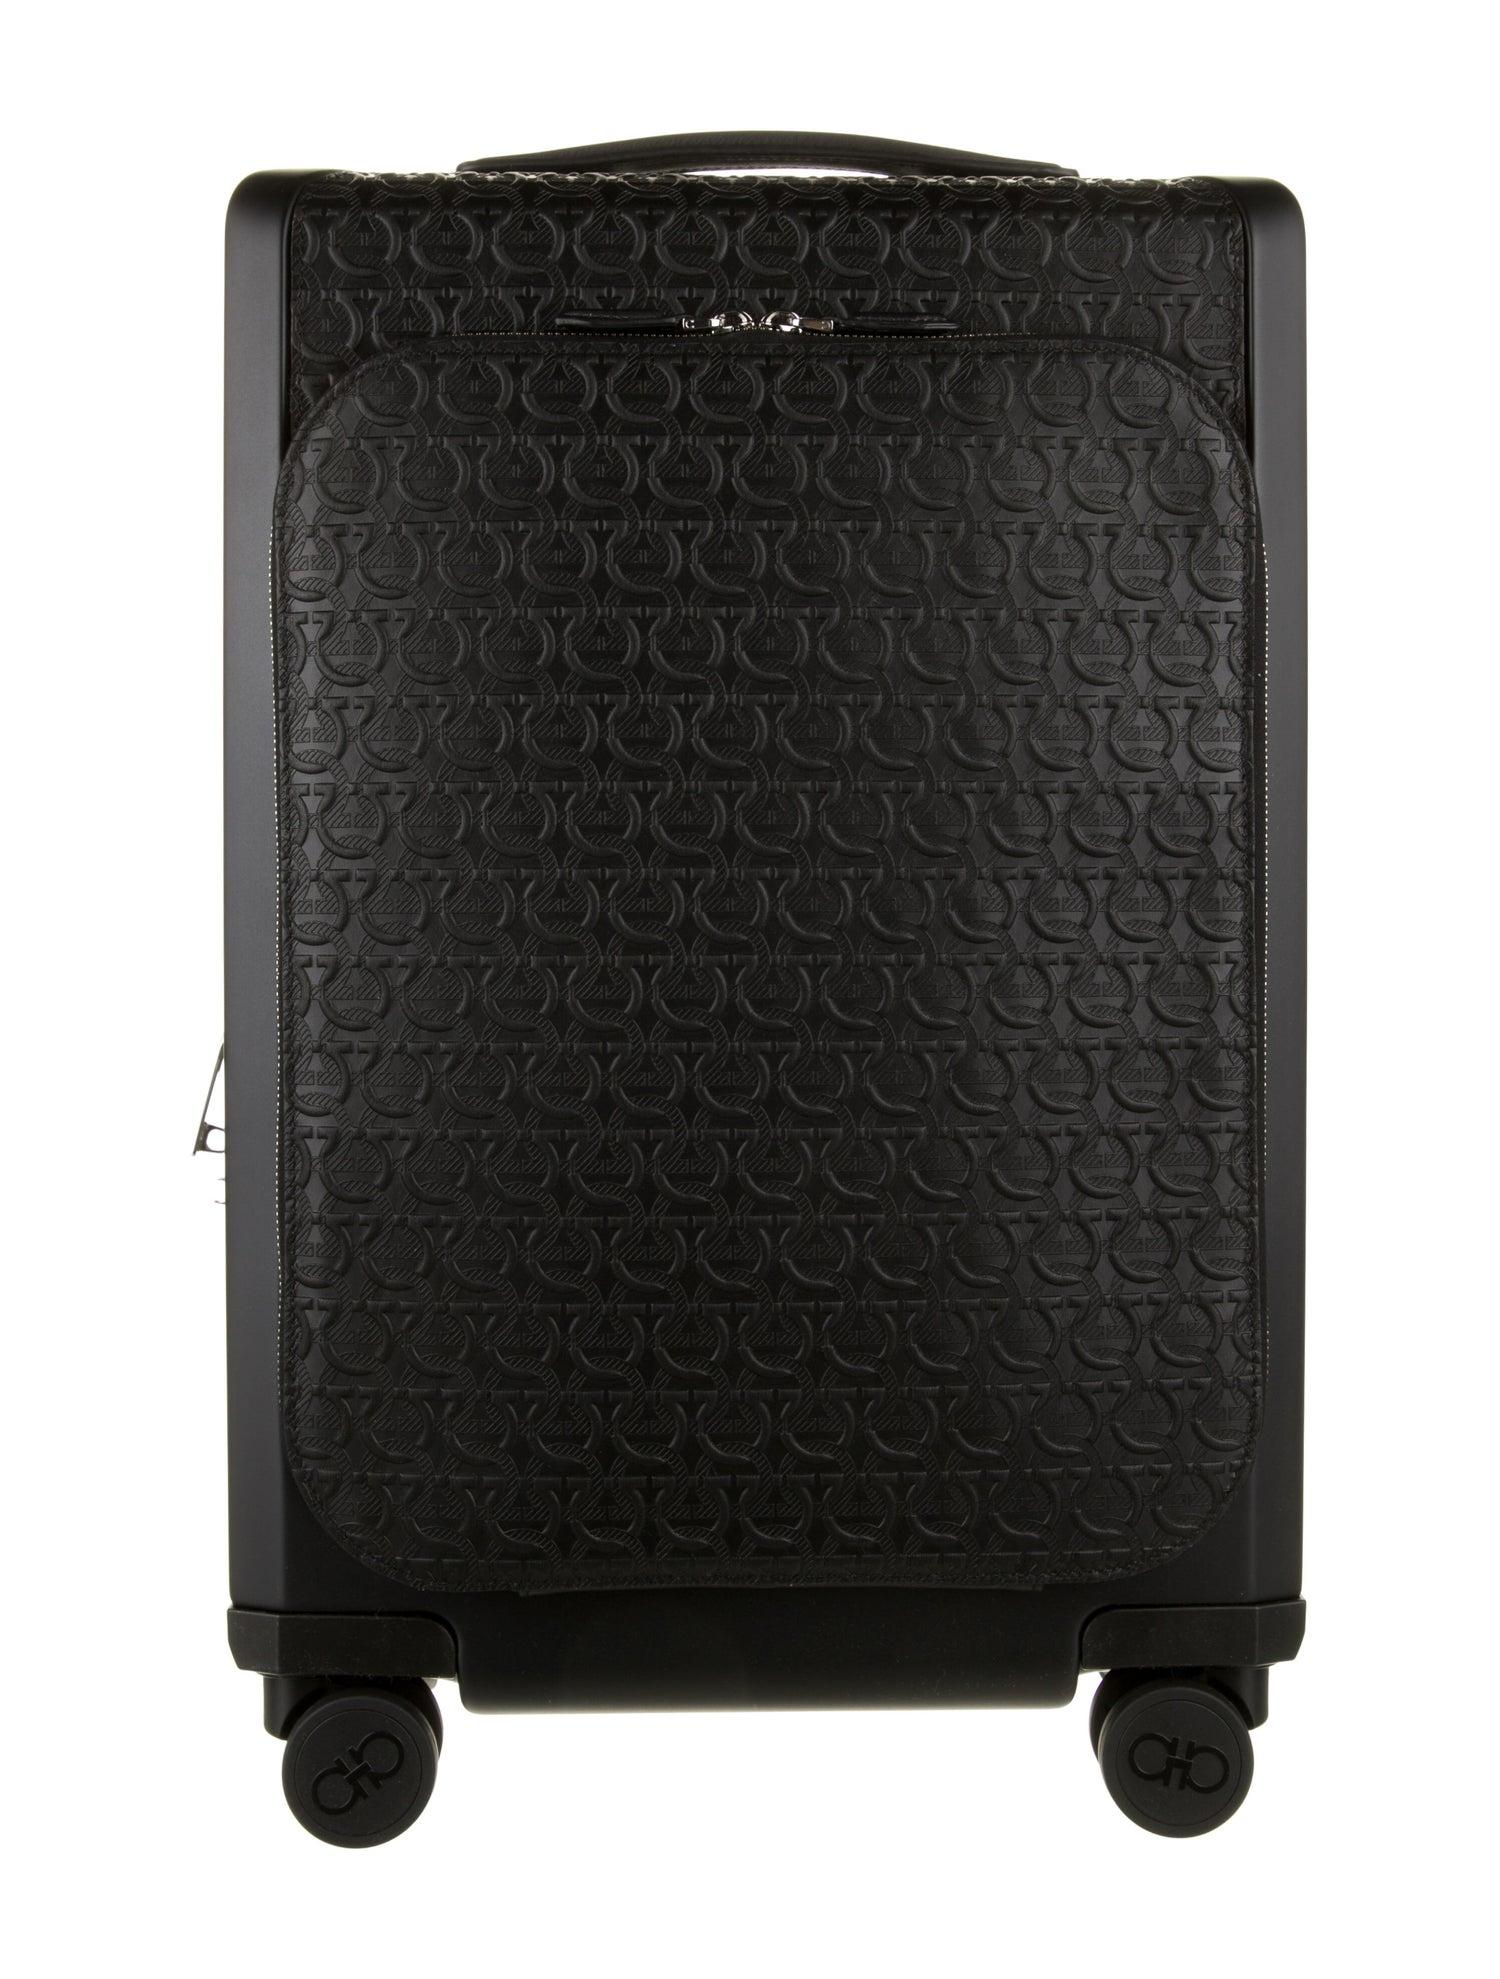 New With Tags Salvatore Ferragamo Carry On Trolley Suitcase $2200 1